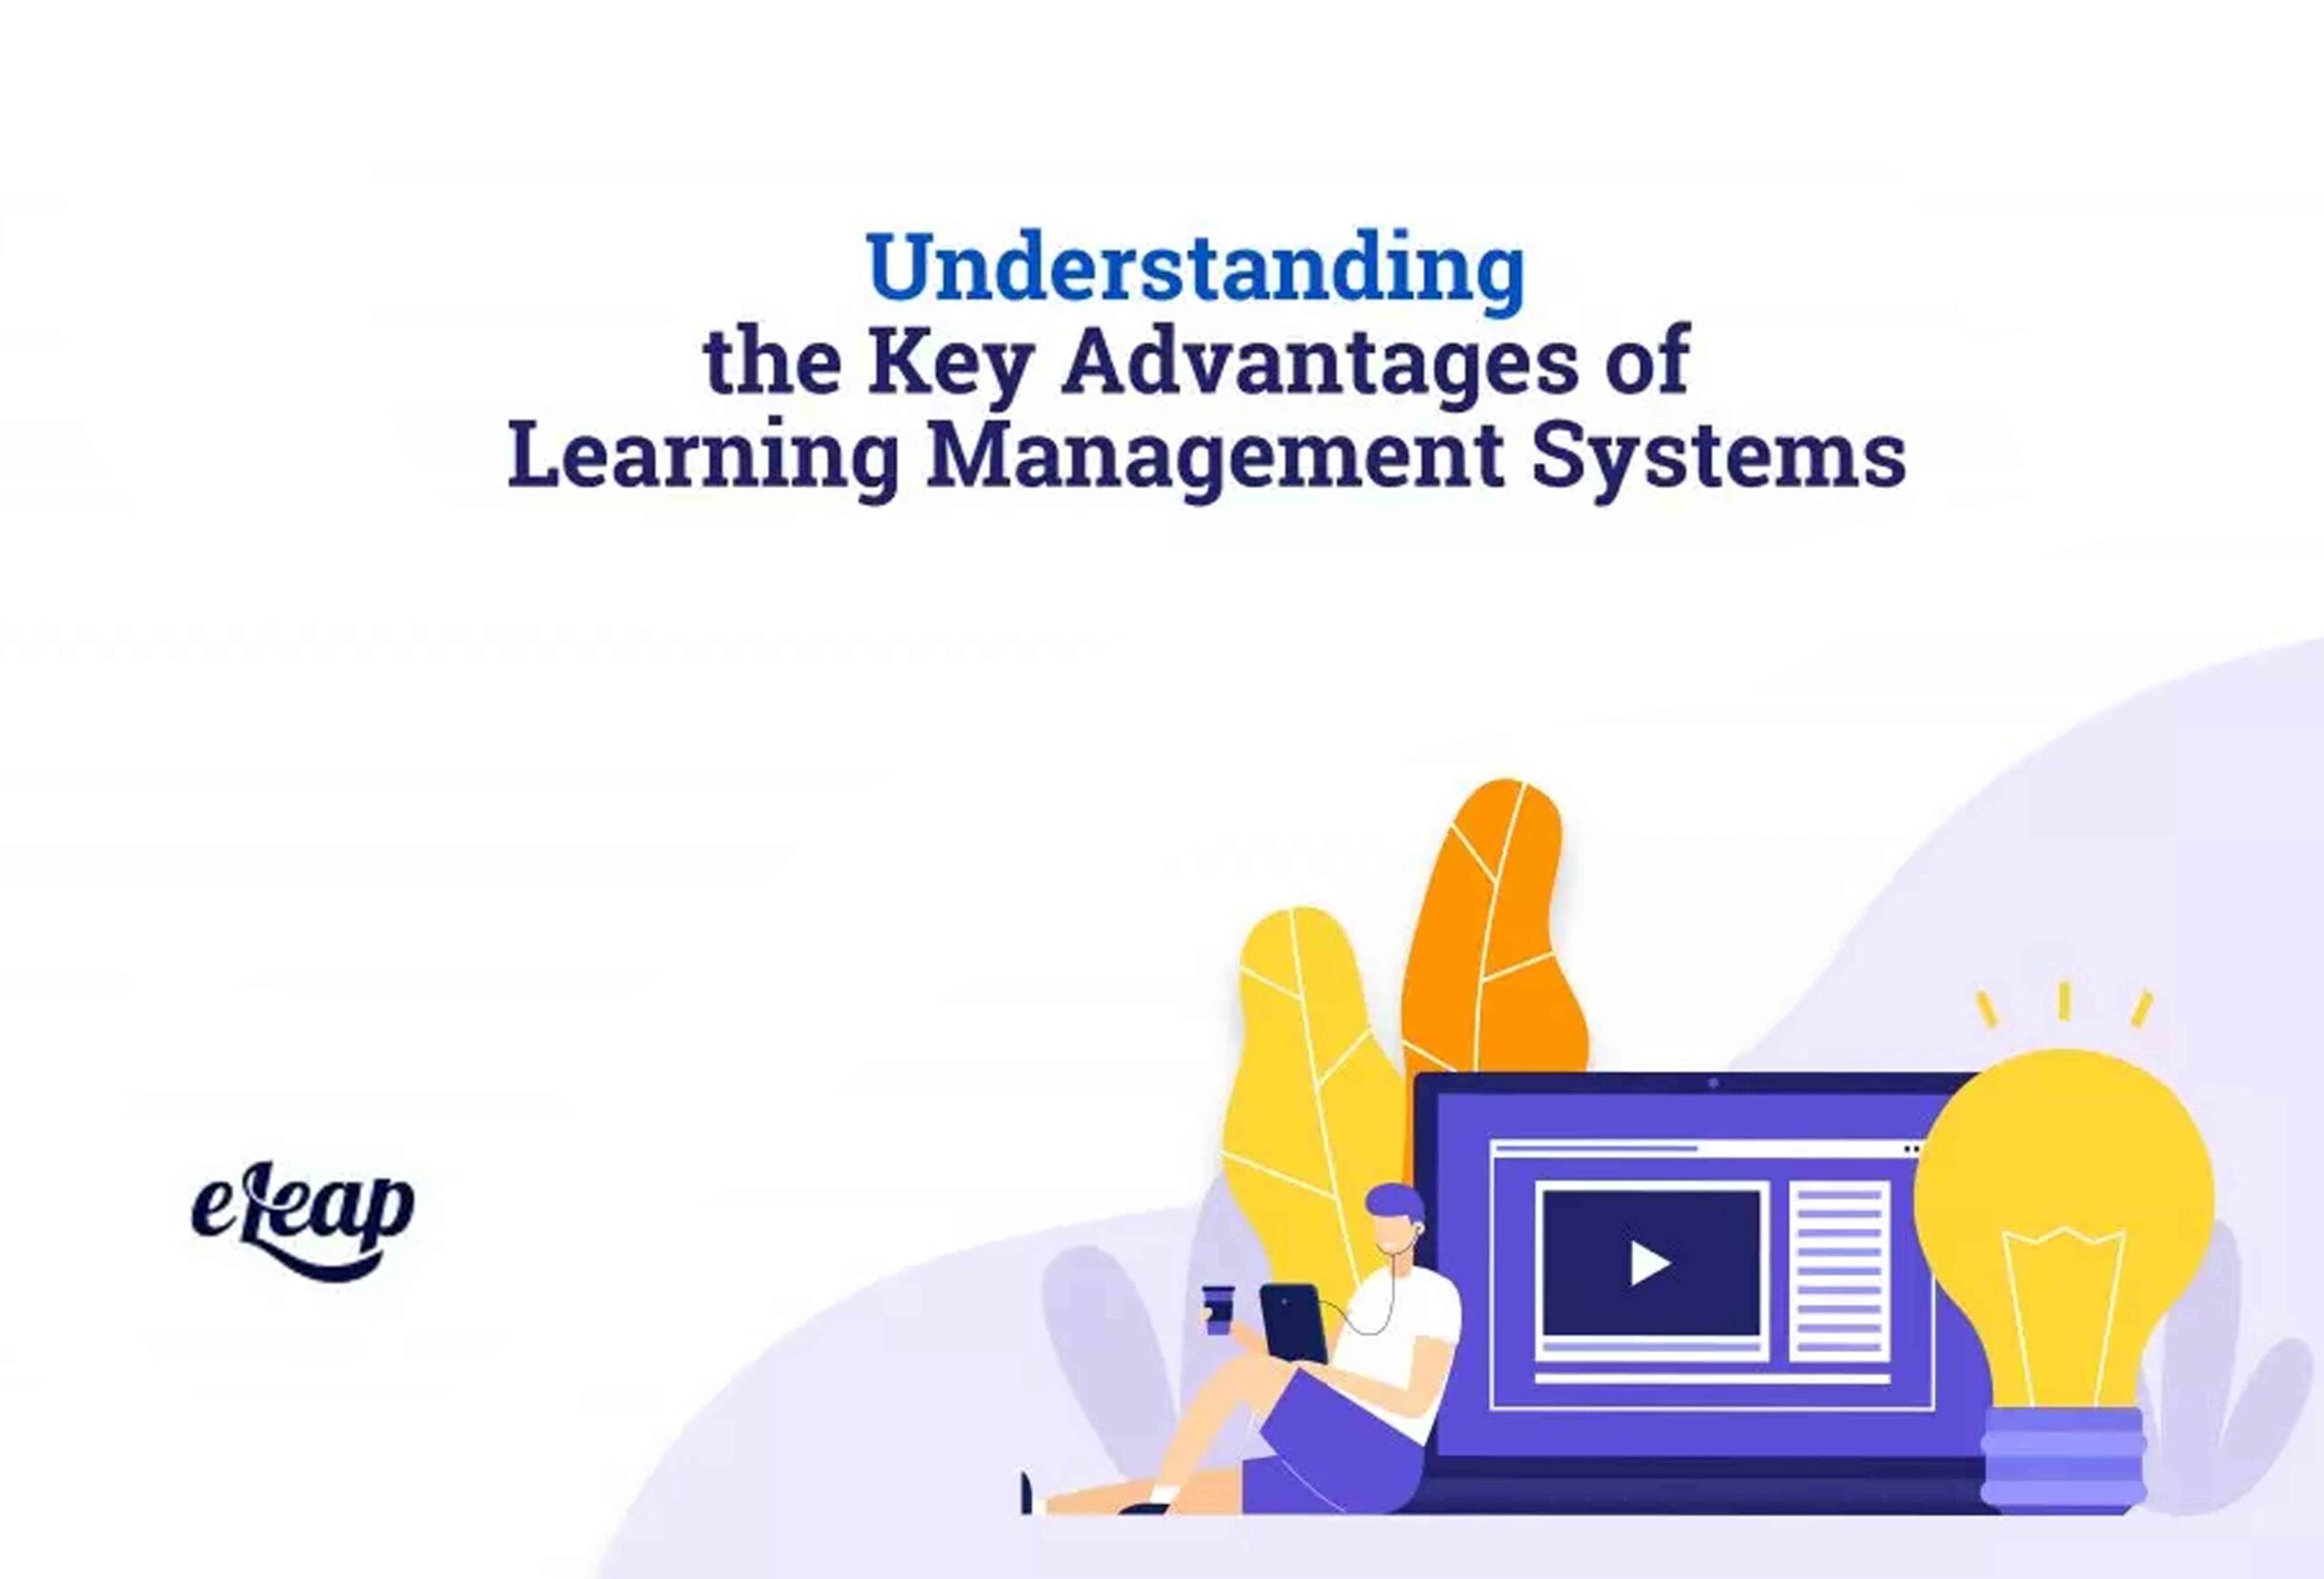 Understanding the Key Advantages of Learning Management Systems